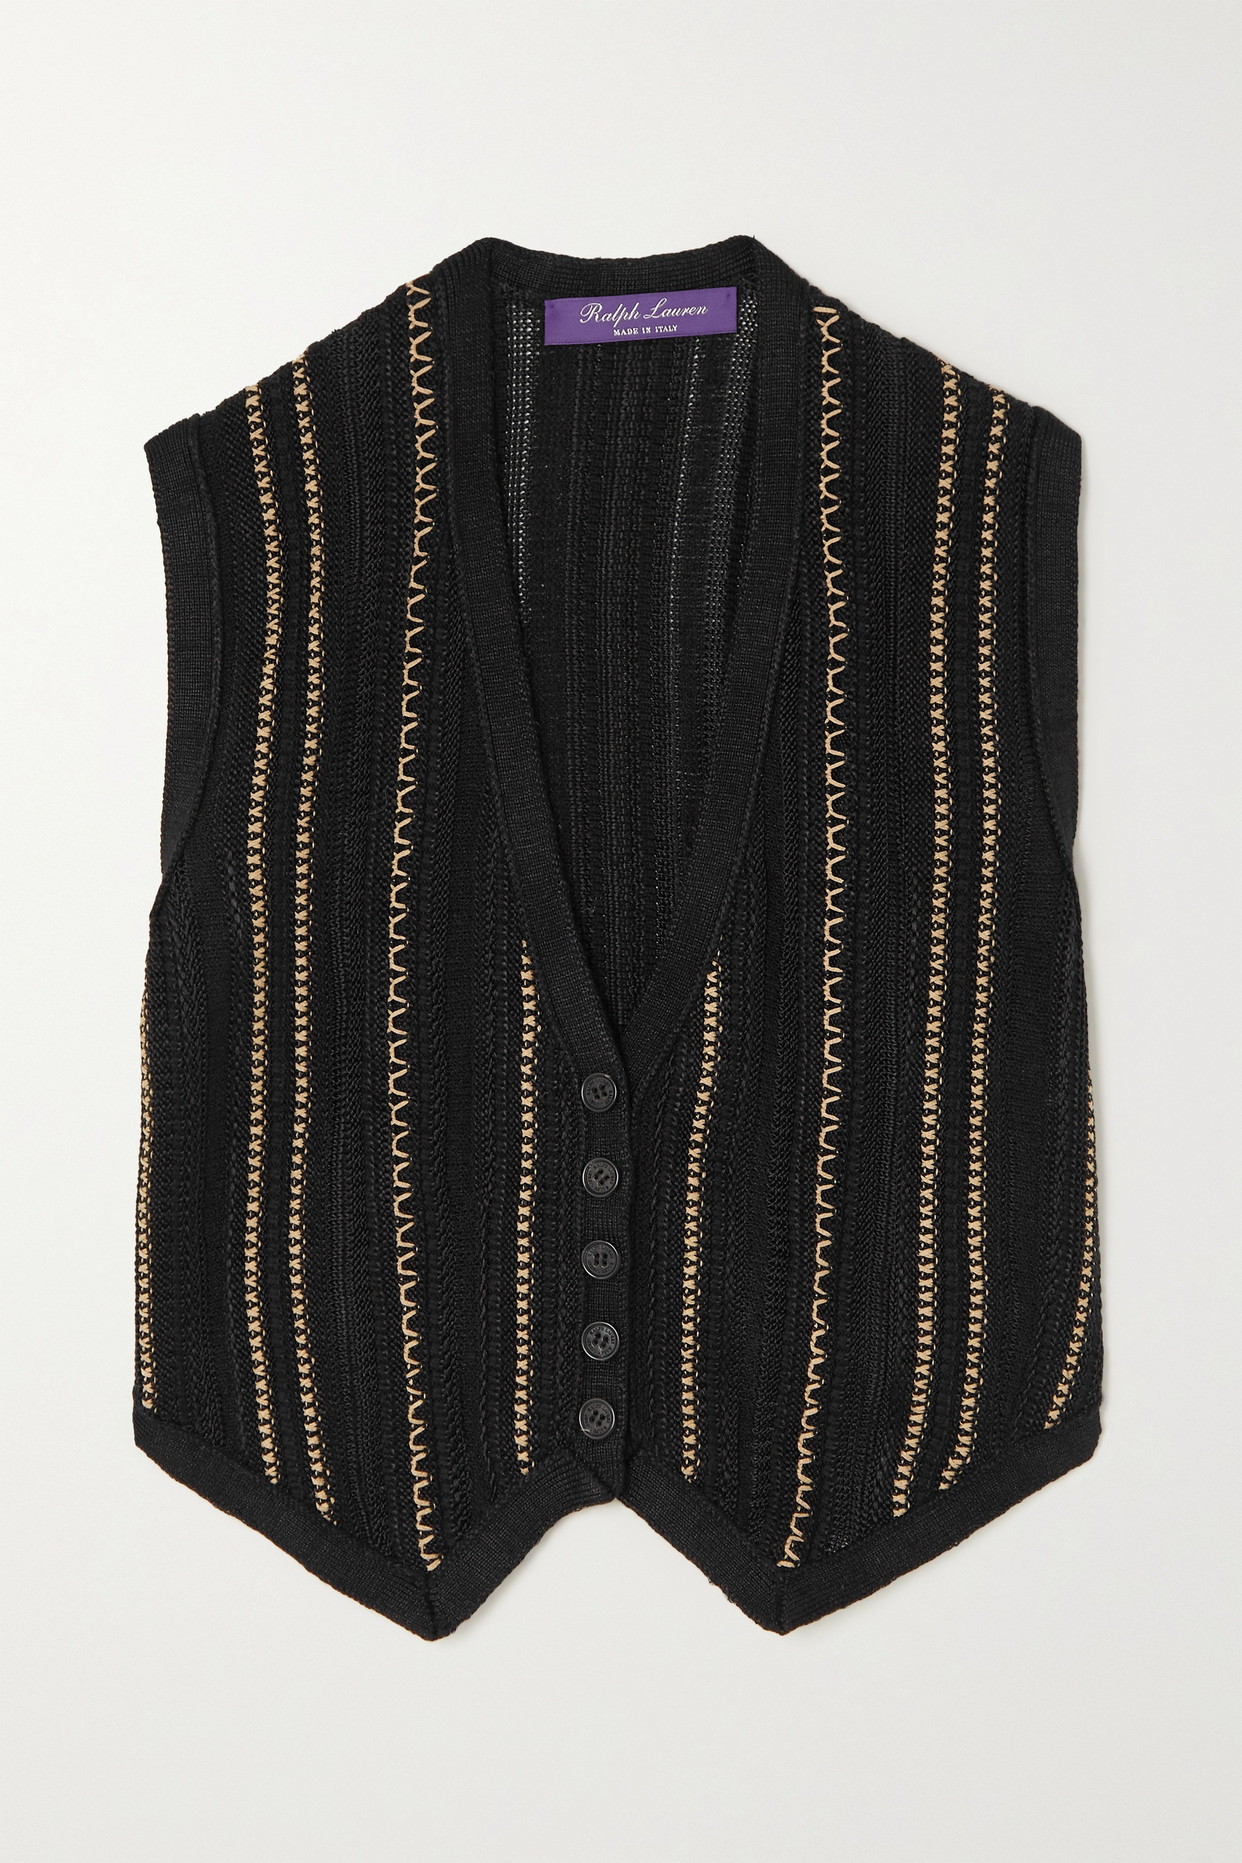 Embroidered Striped Crochet-Knit Silk and Linen-Blend Vest